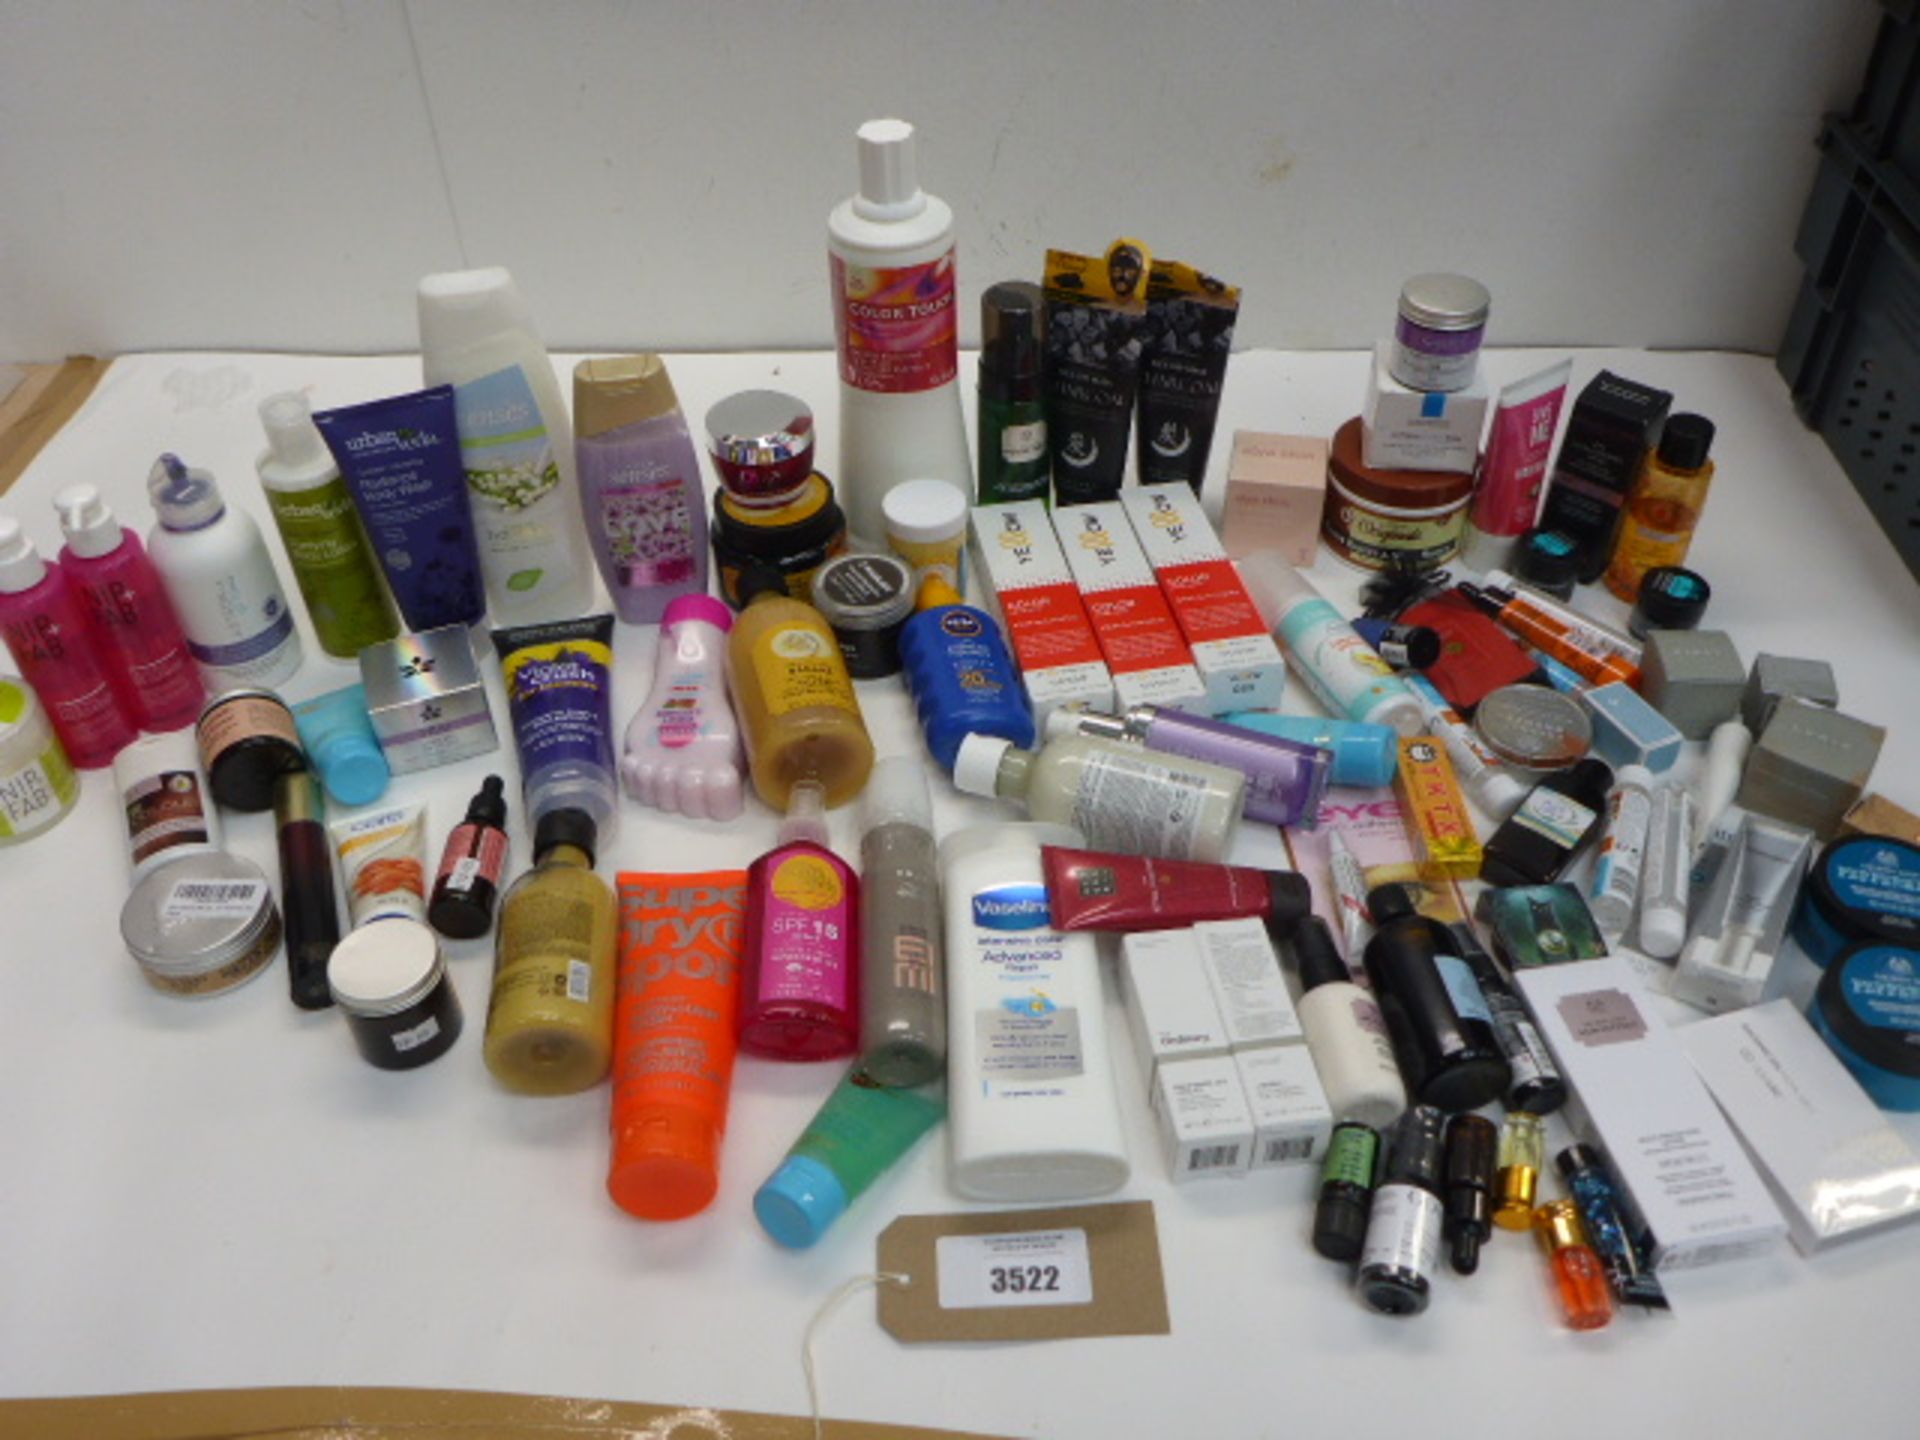 Large bag of toiletries including shampoo, conditioner, body wash, moisturizer, cleanser,